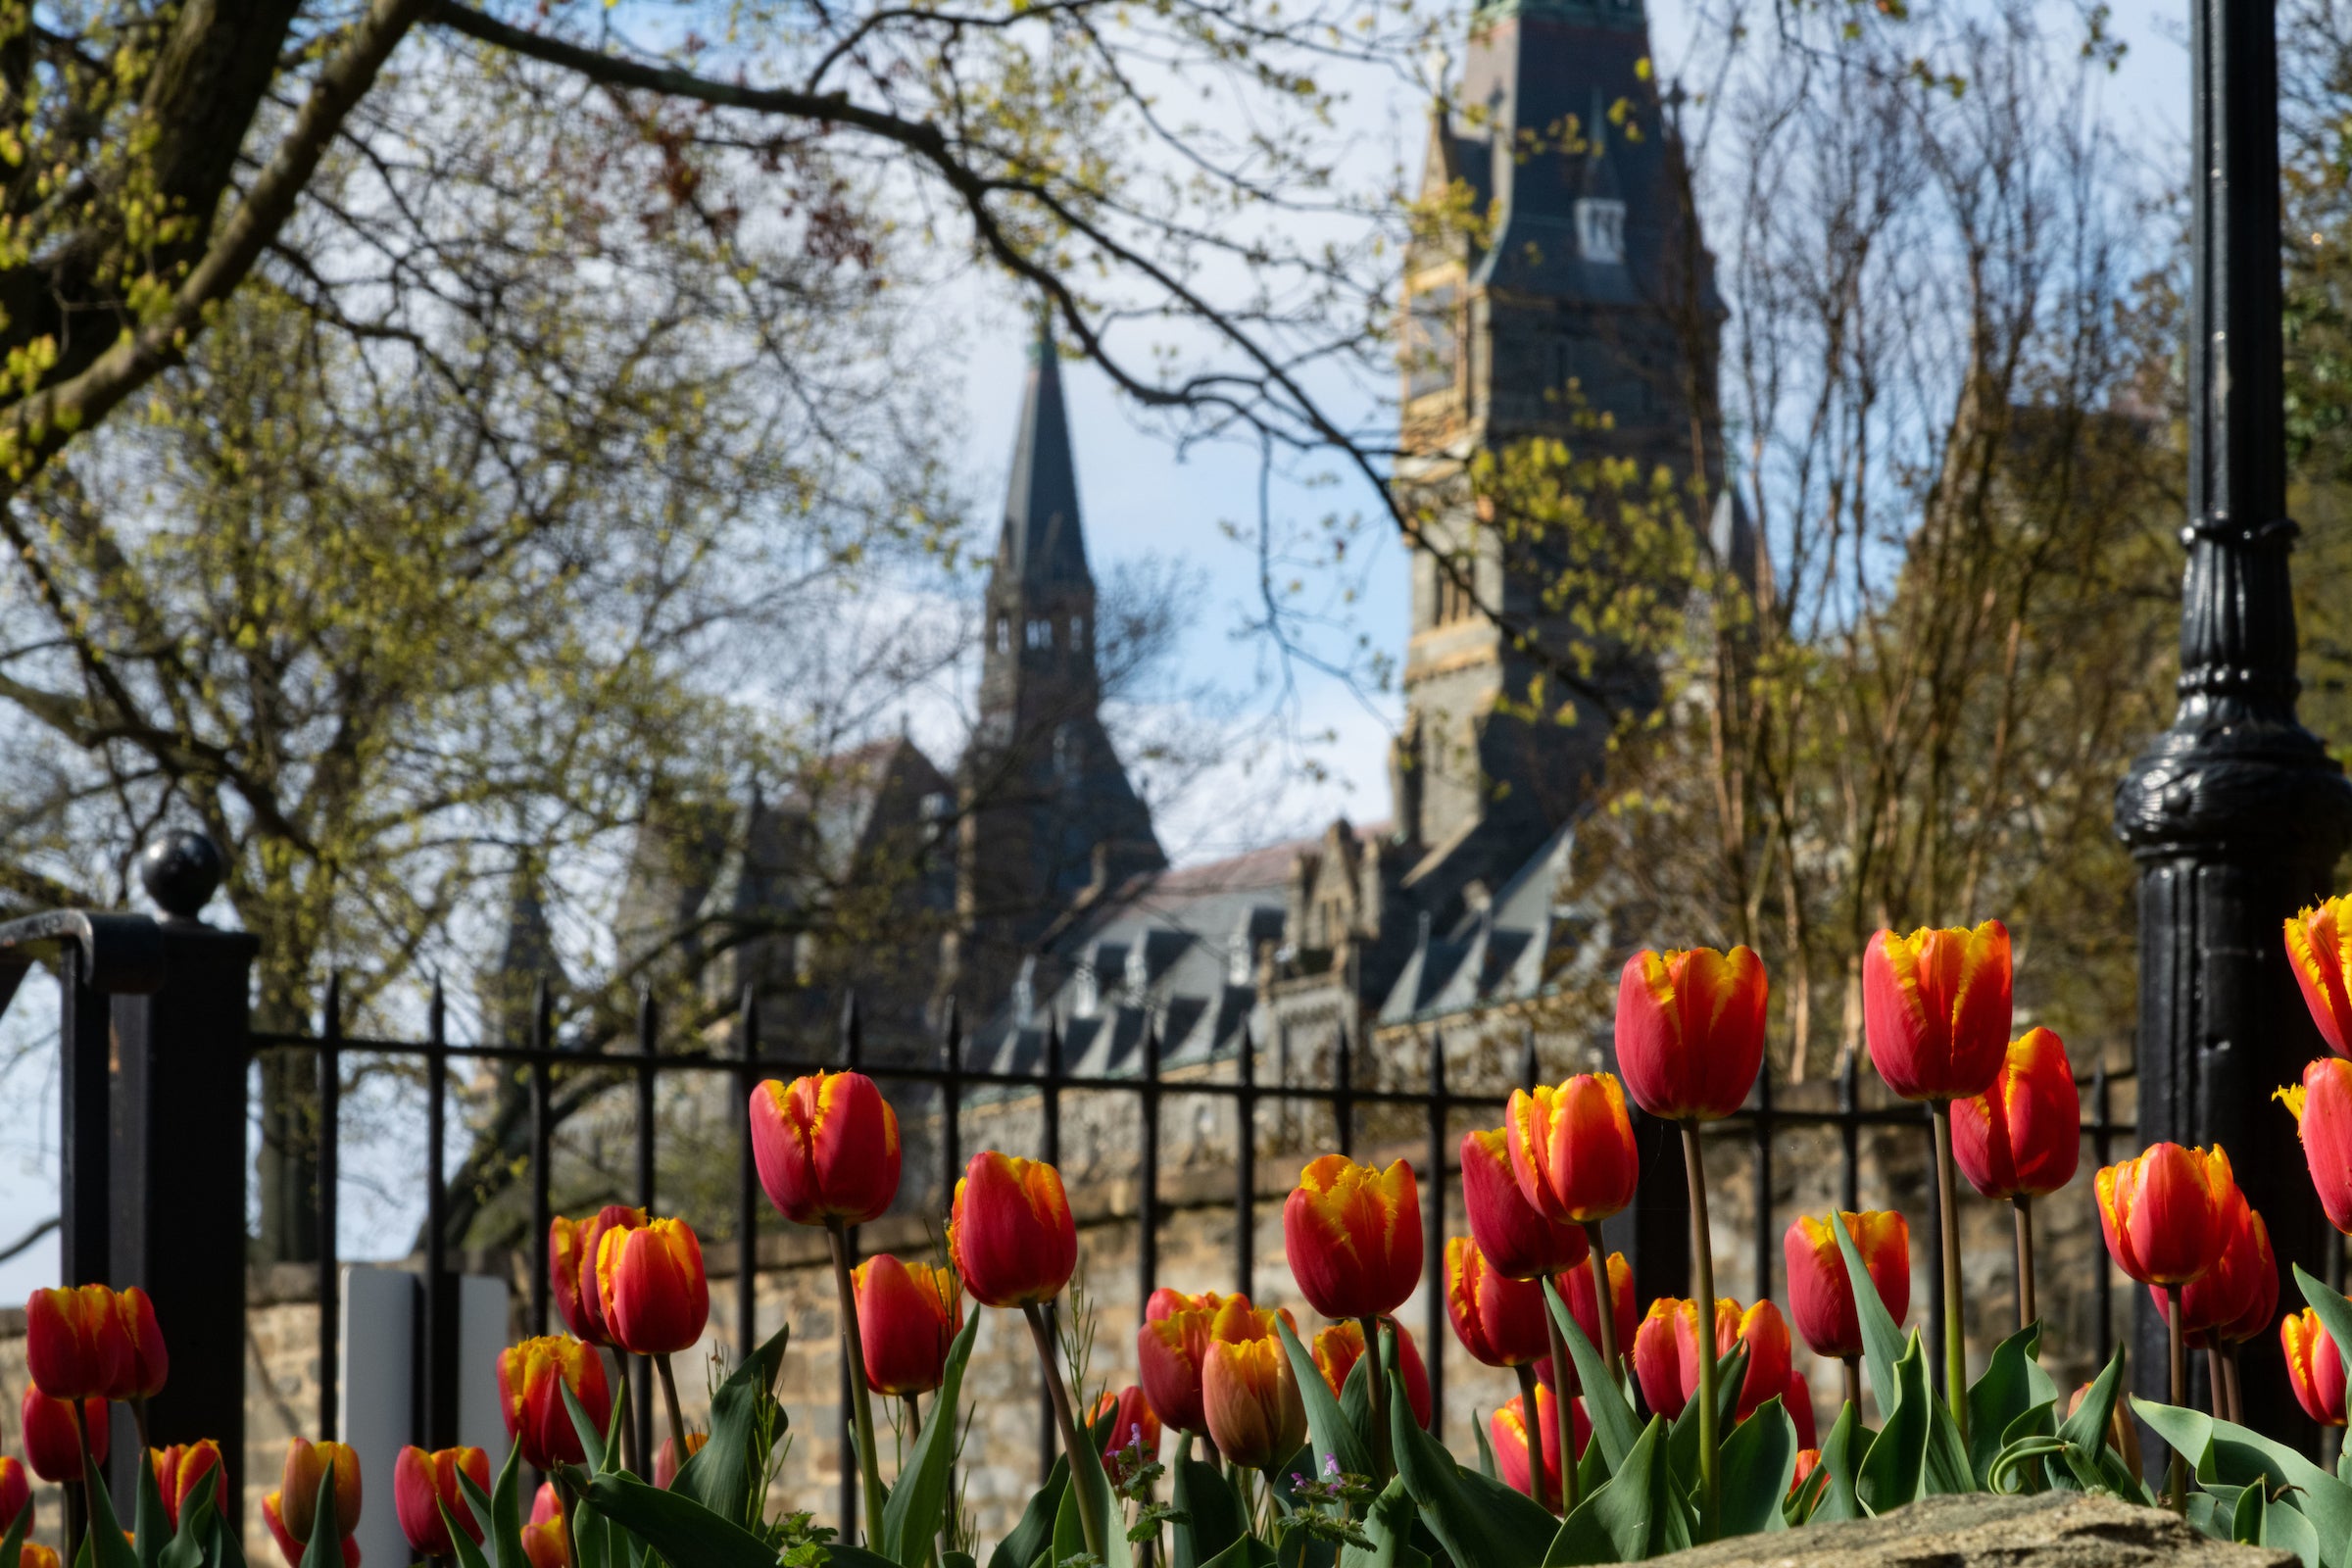 Campus view of Healy Hall with tulips flowers in foreground